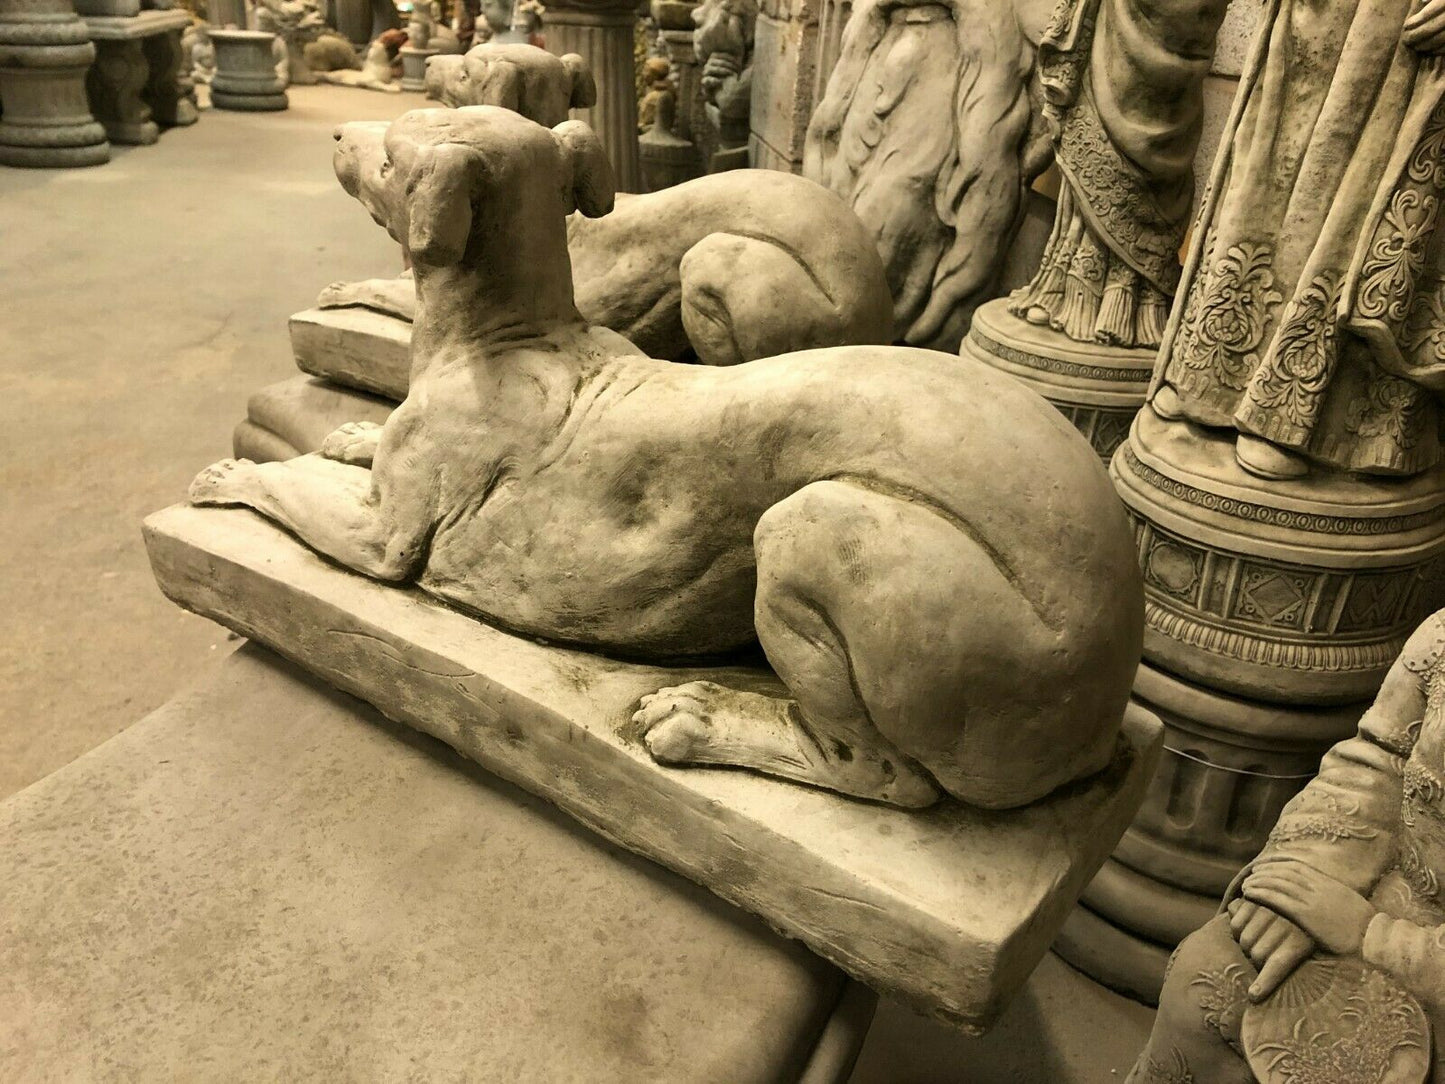 Stone Laying Down Greyhound/Whippet Dog Statue